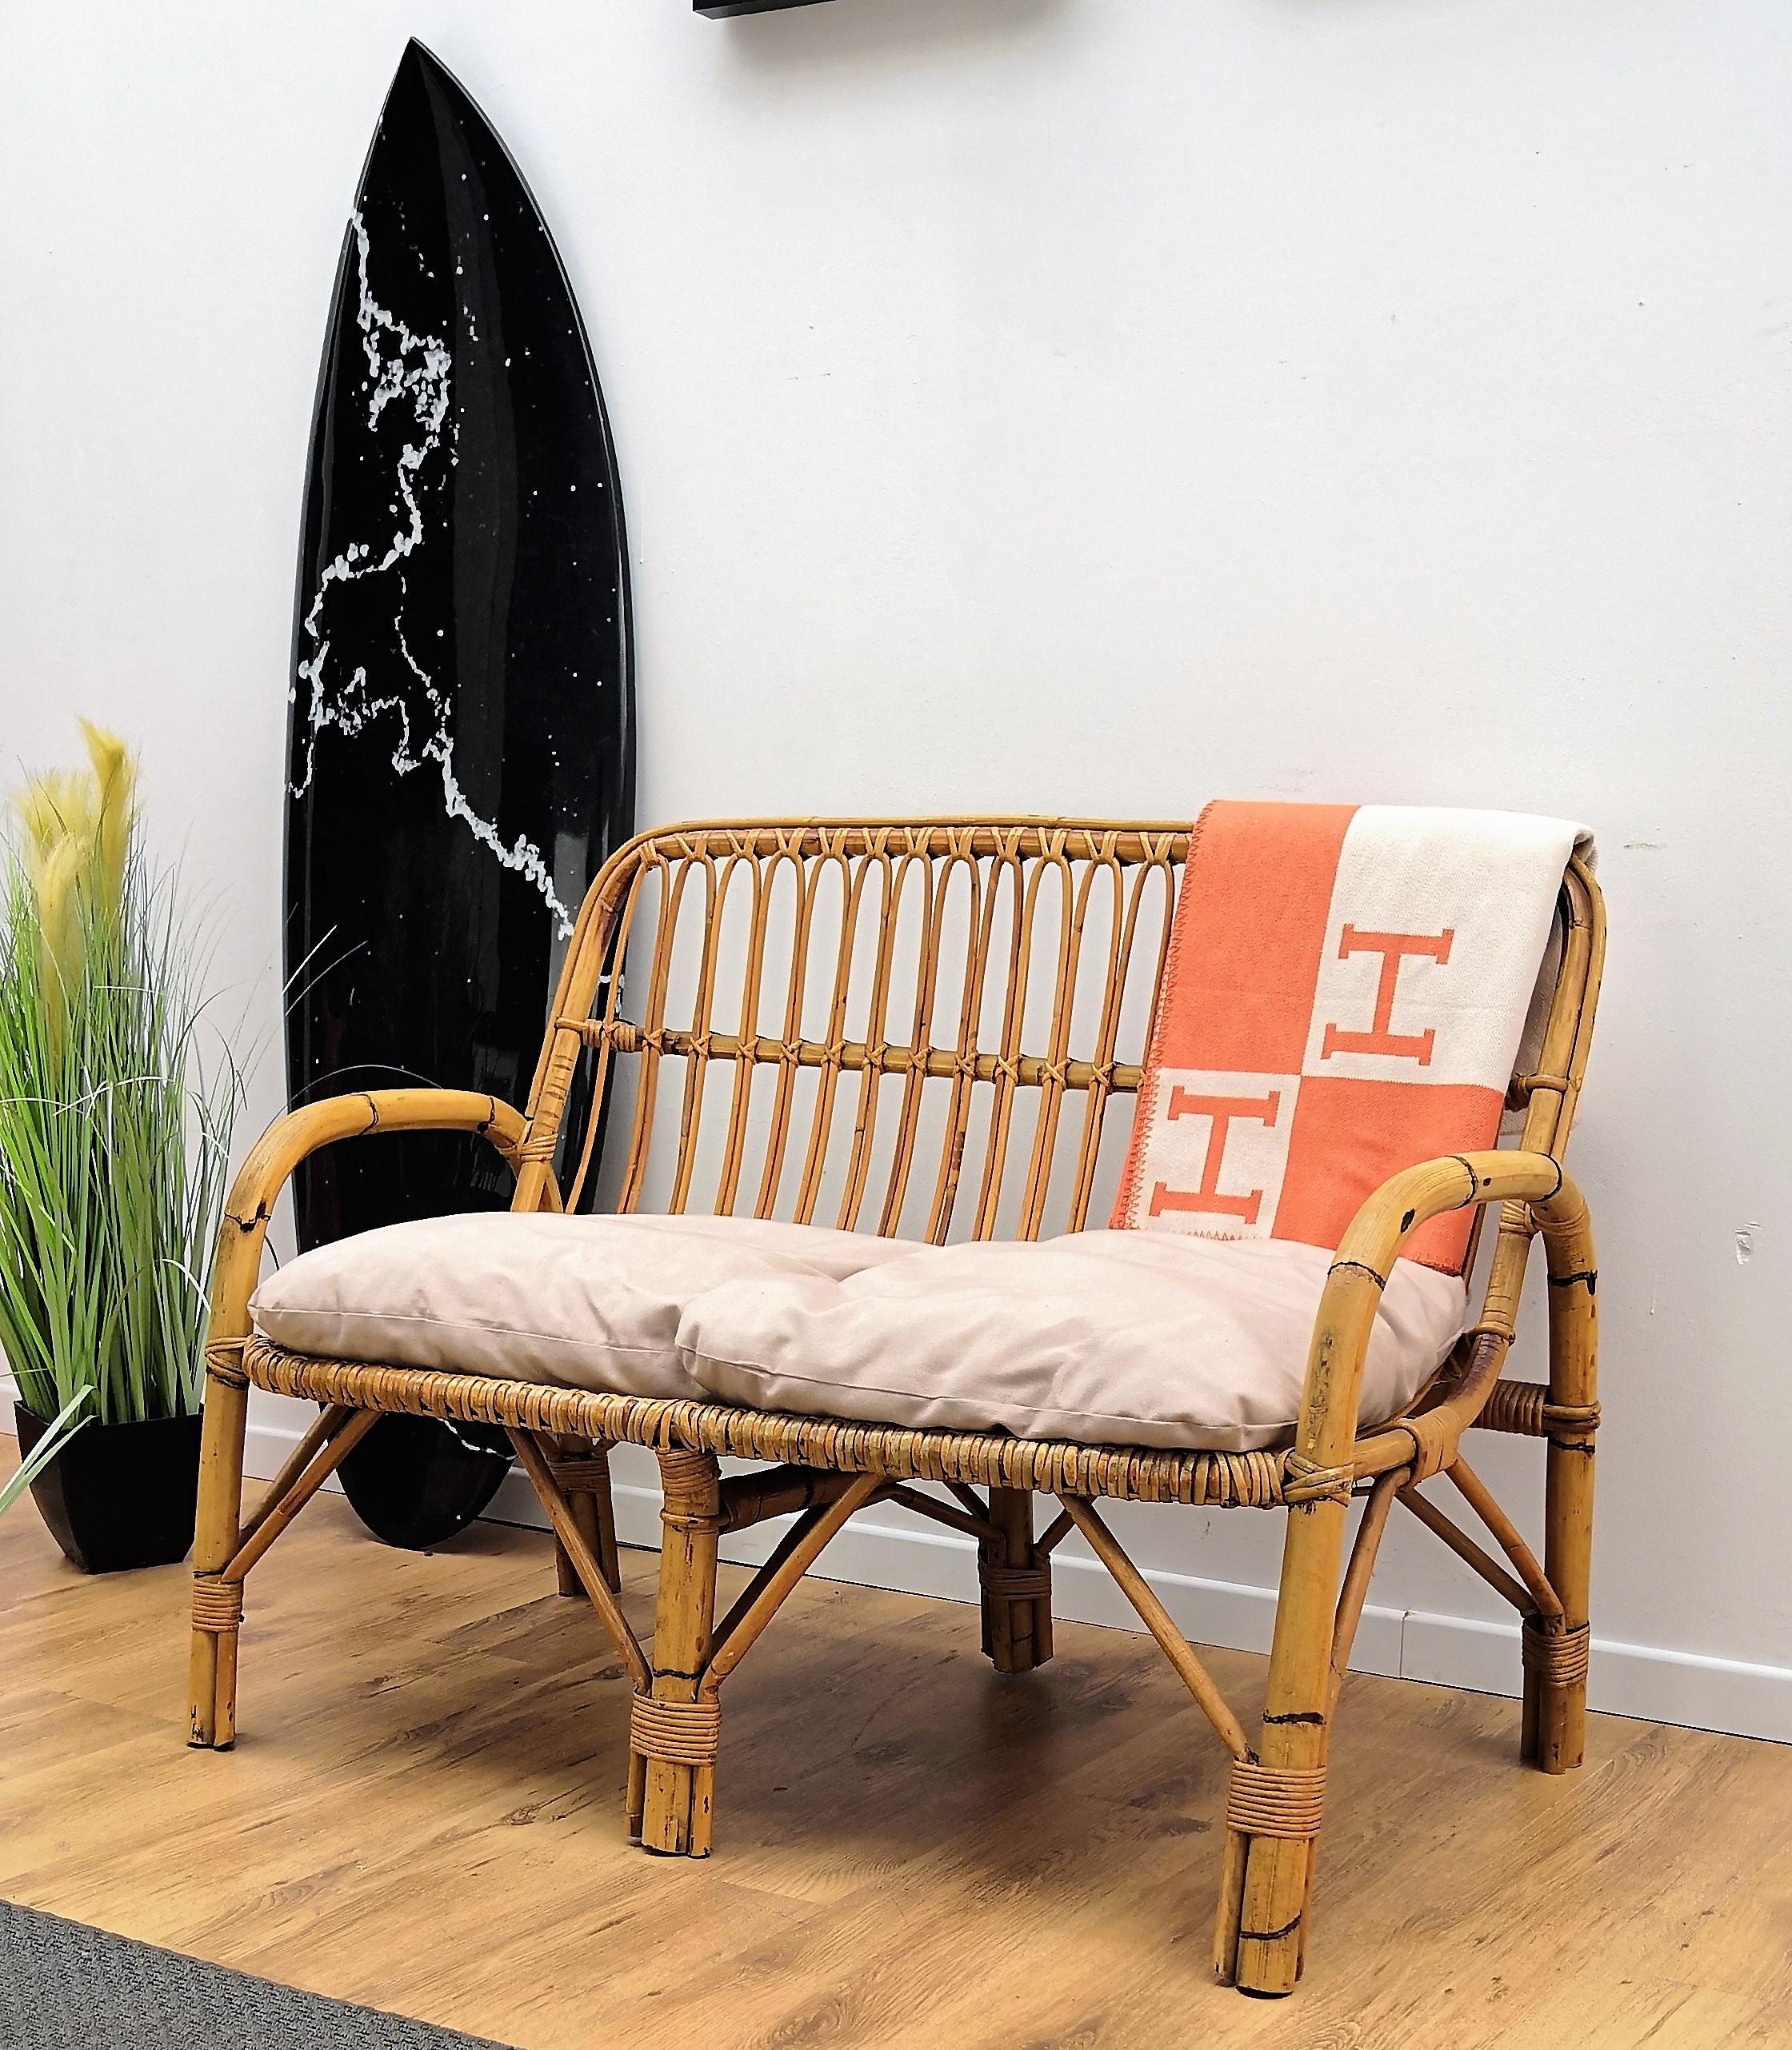 Beautiful 1960s Italian Mid-Century Modern bench in rattan wicker bamboo. This charming lounge bench chair is in the typical style of Franco Albini and Adrien Audoux where the organic beauty of the woven materials is timeless and Classic, making